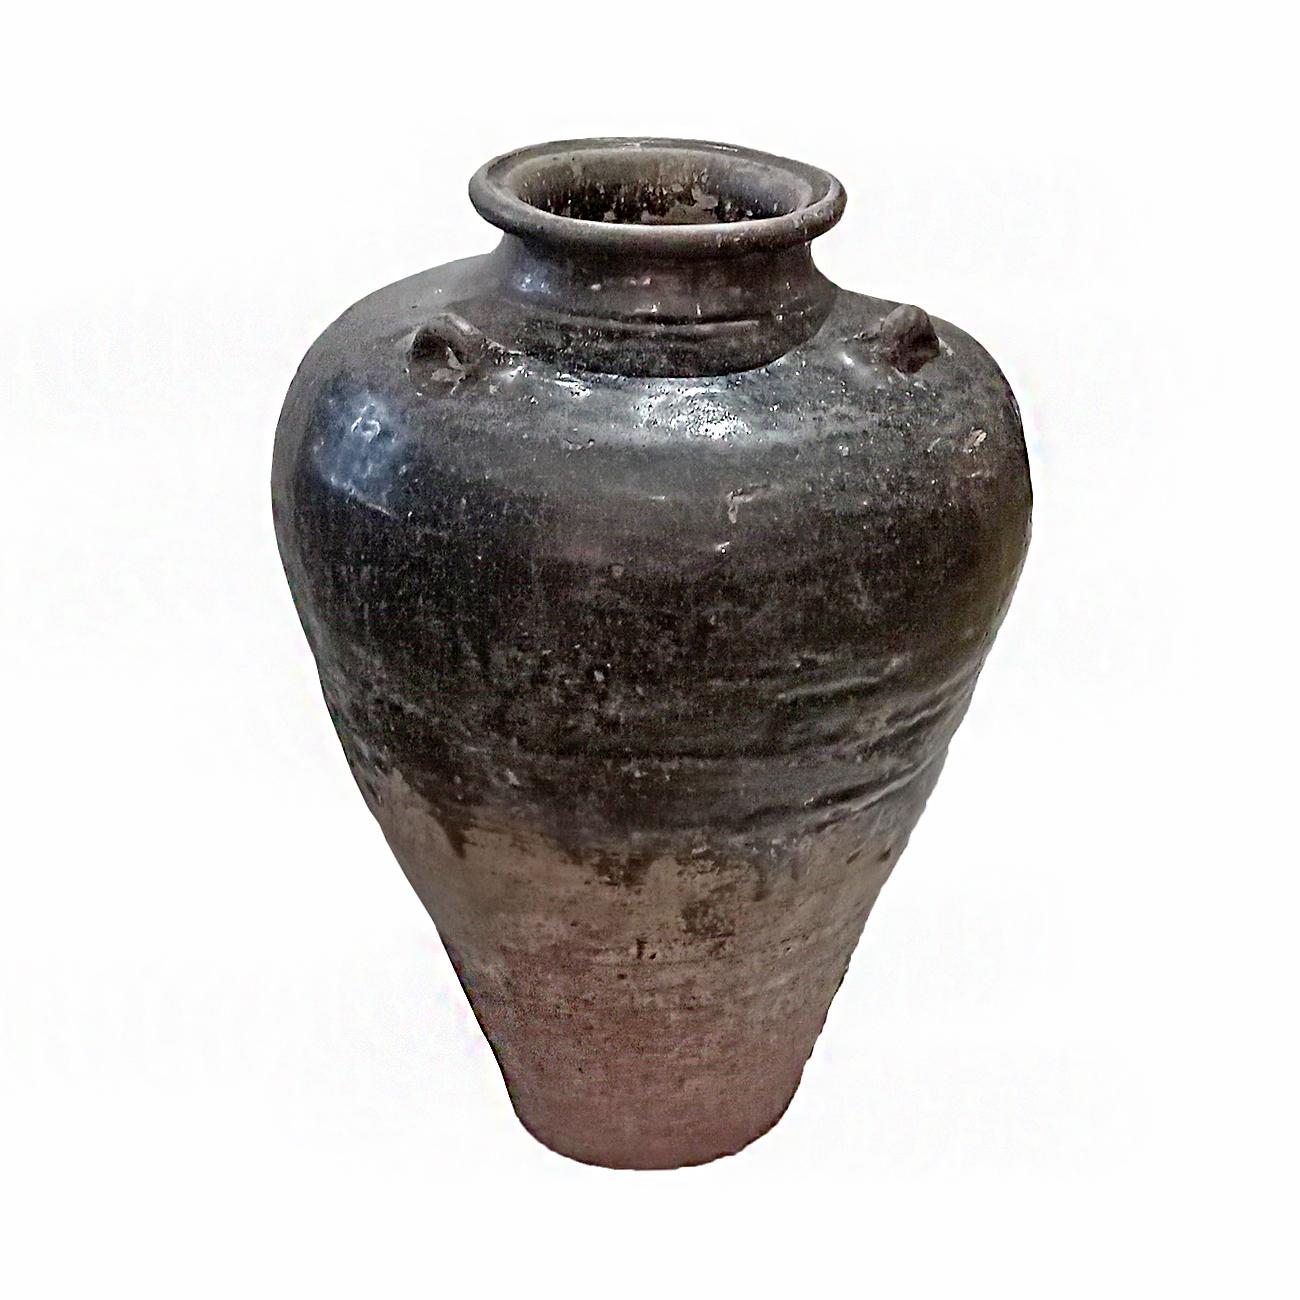 A large terracotta jar / vase / urn from Bali, Indonesia, late 20th Century, hand-crafted. Decorative handles and semi-gloss black glaze. Narrow top and bottom. 

Can be used indoors or outdoors. 
